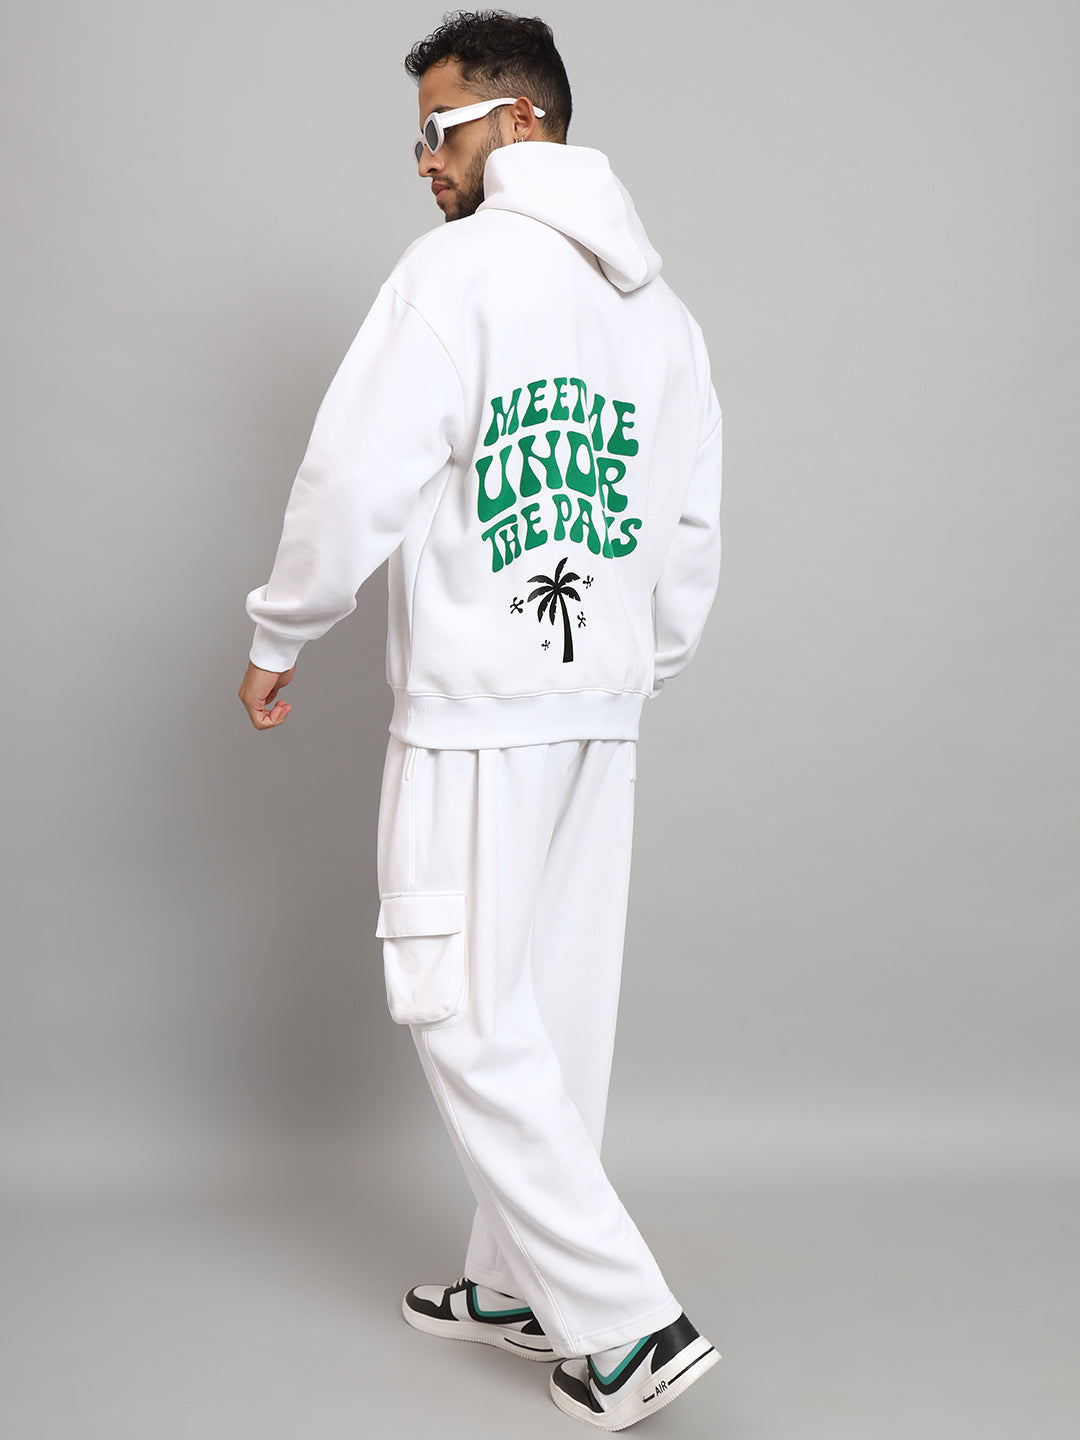 Griffel Men Oversized Fit MEET ME UNDER THE PALM Print 100% Cotton White Fleece Hoodie and trackpant - griffel